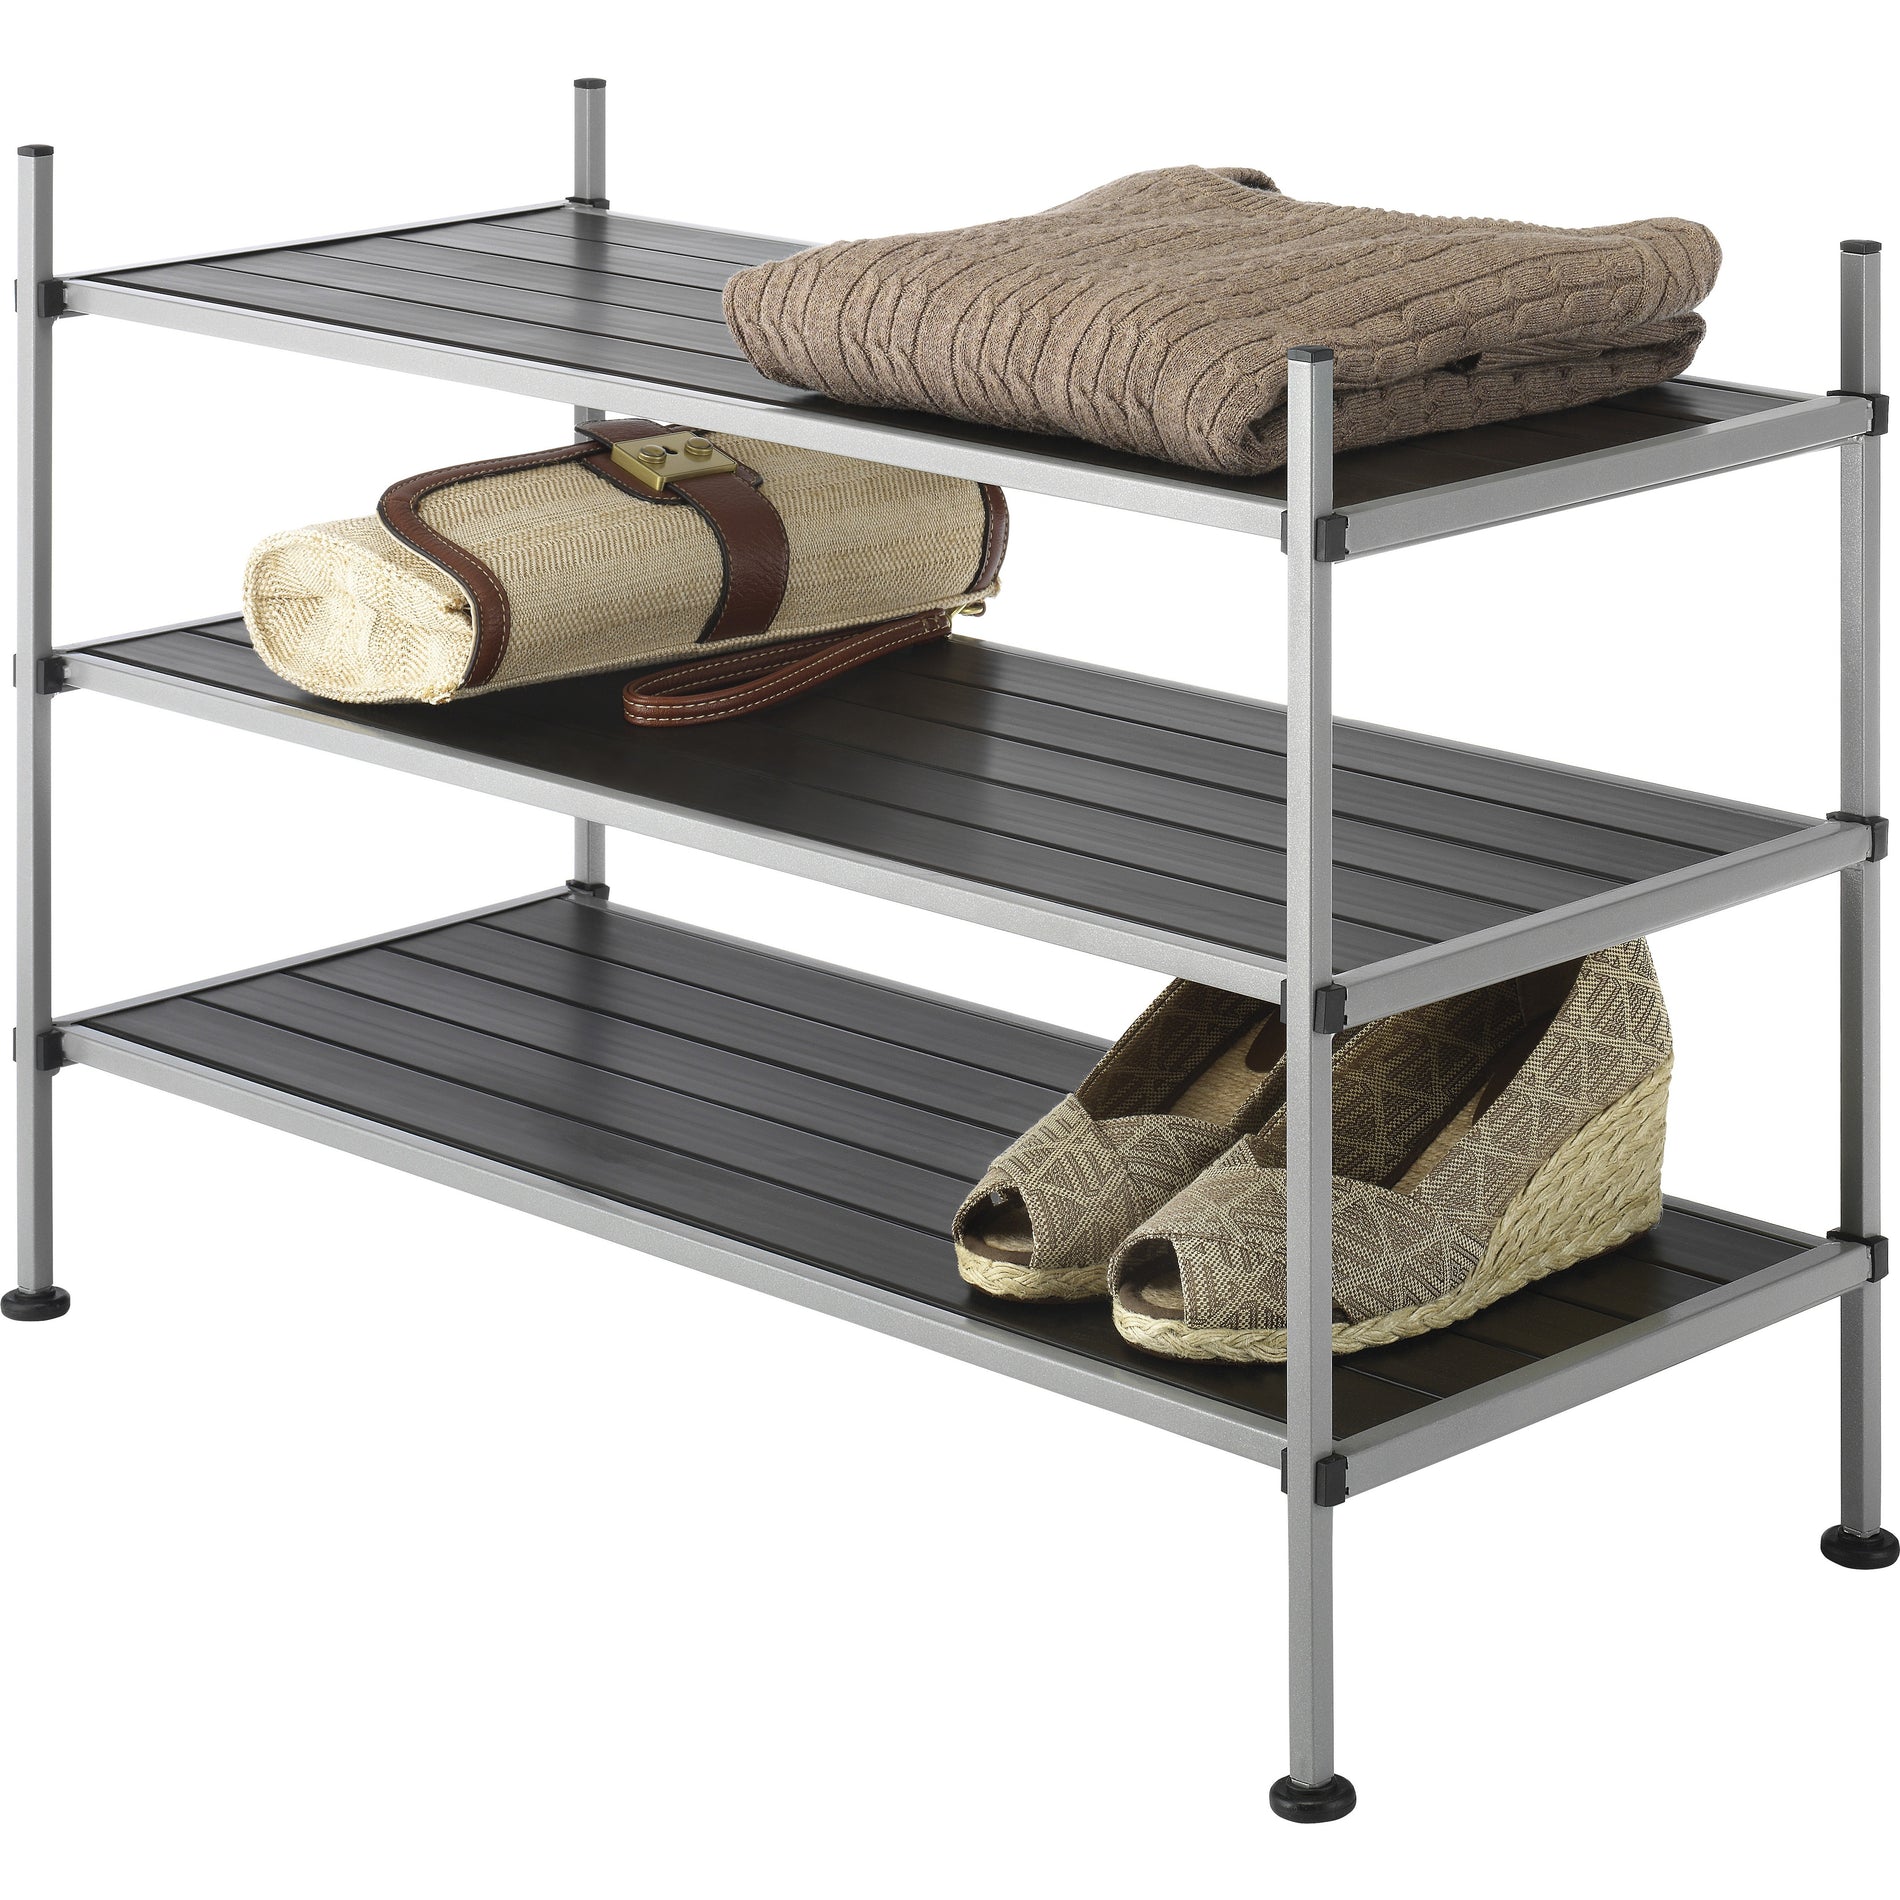 Whitmor 6779-4579 Storage Rack, Heavy Duty, Breathable, Stackable, Sturdy, Silver Frame, 3 Tiers